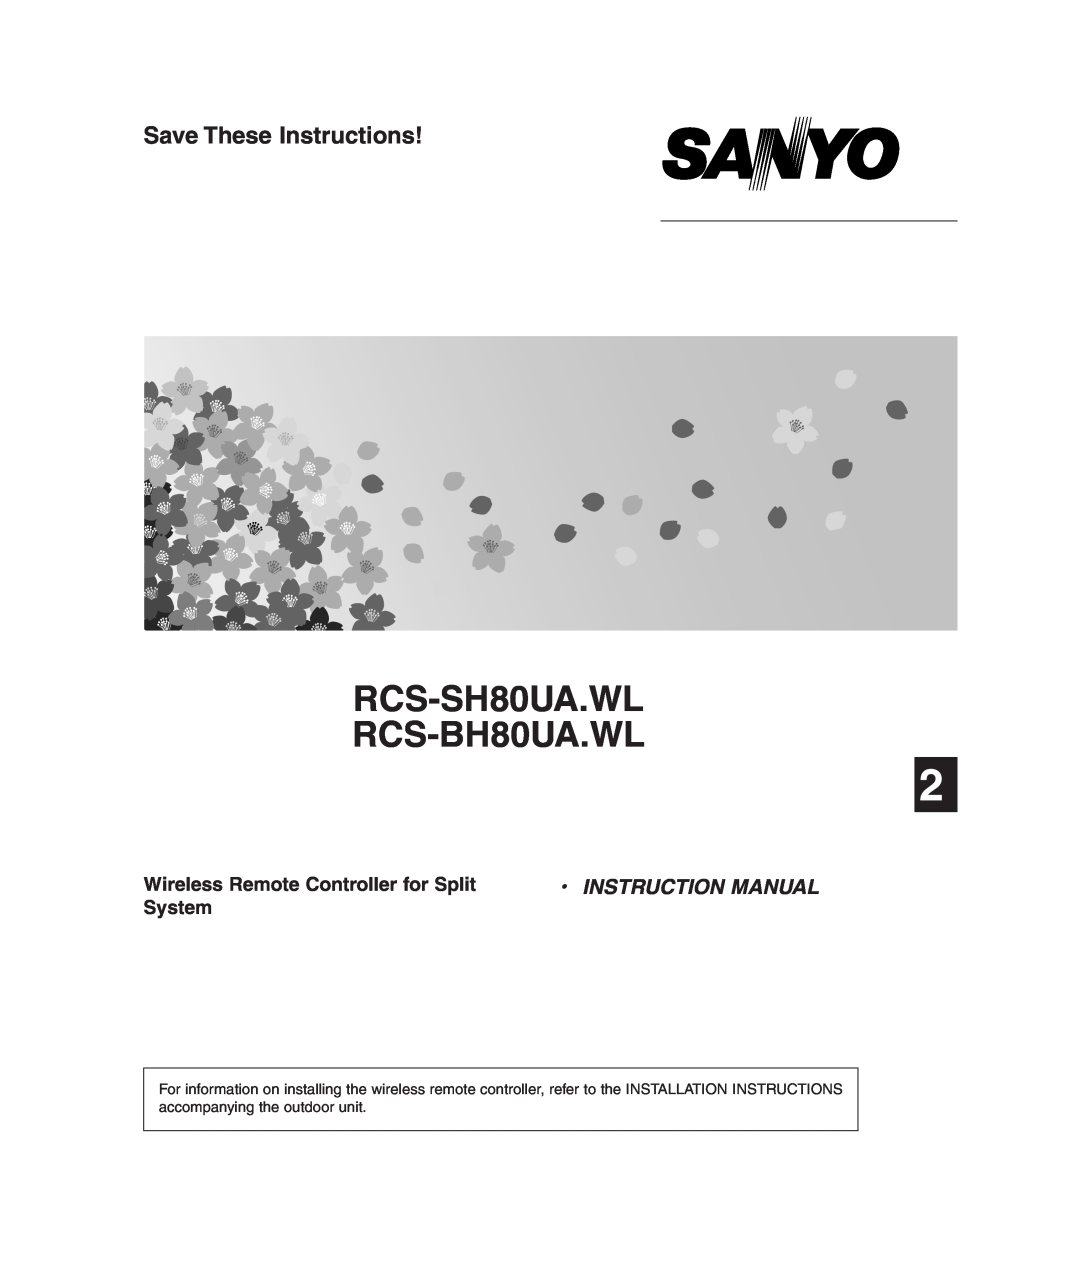 Sanyo SHA-KC64UG RCS-SH80UA.WL RCS-BH80UA.WL, Save These Instructions, Wireless Remote Controller for Split, System 